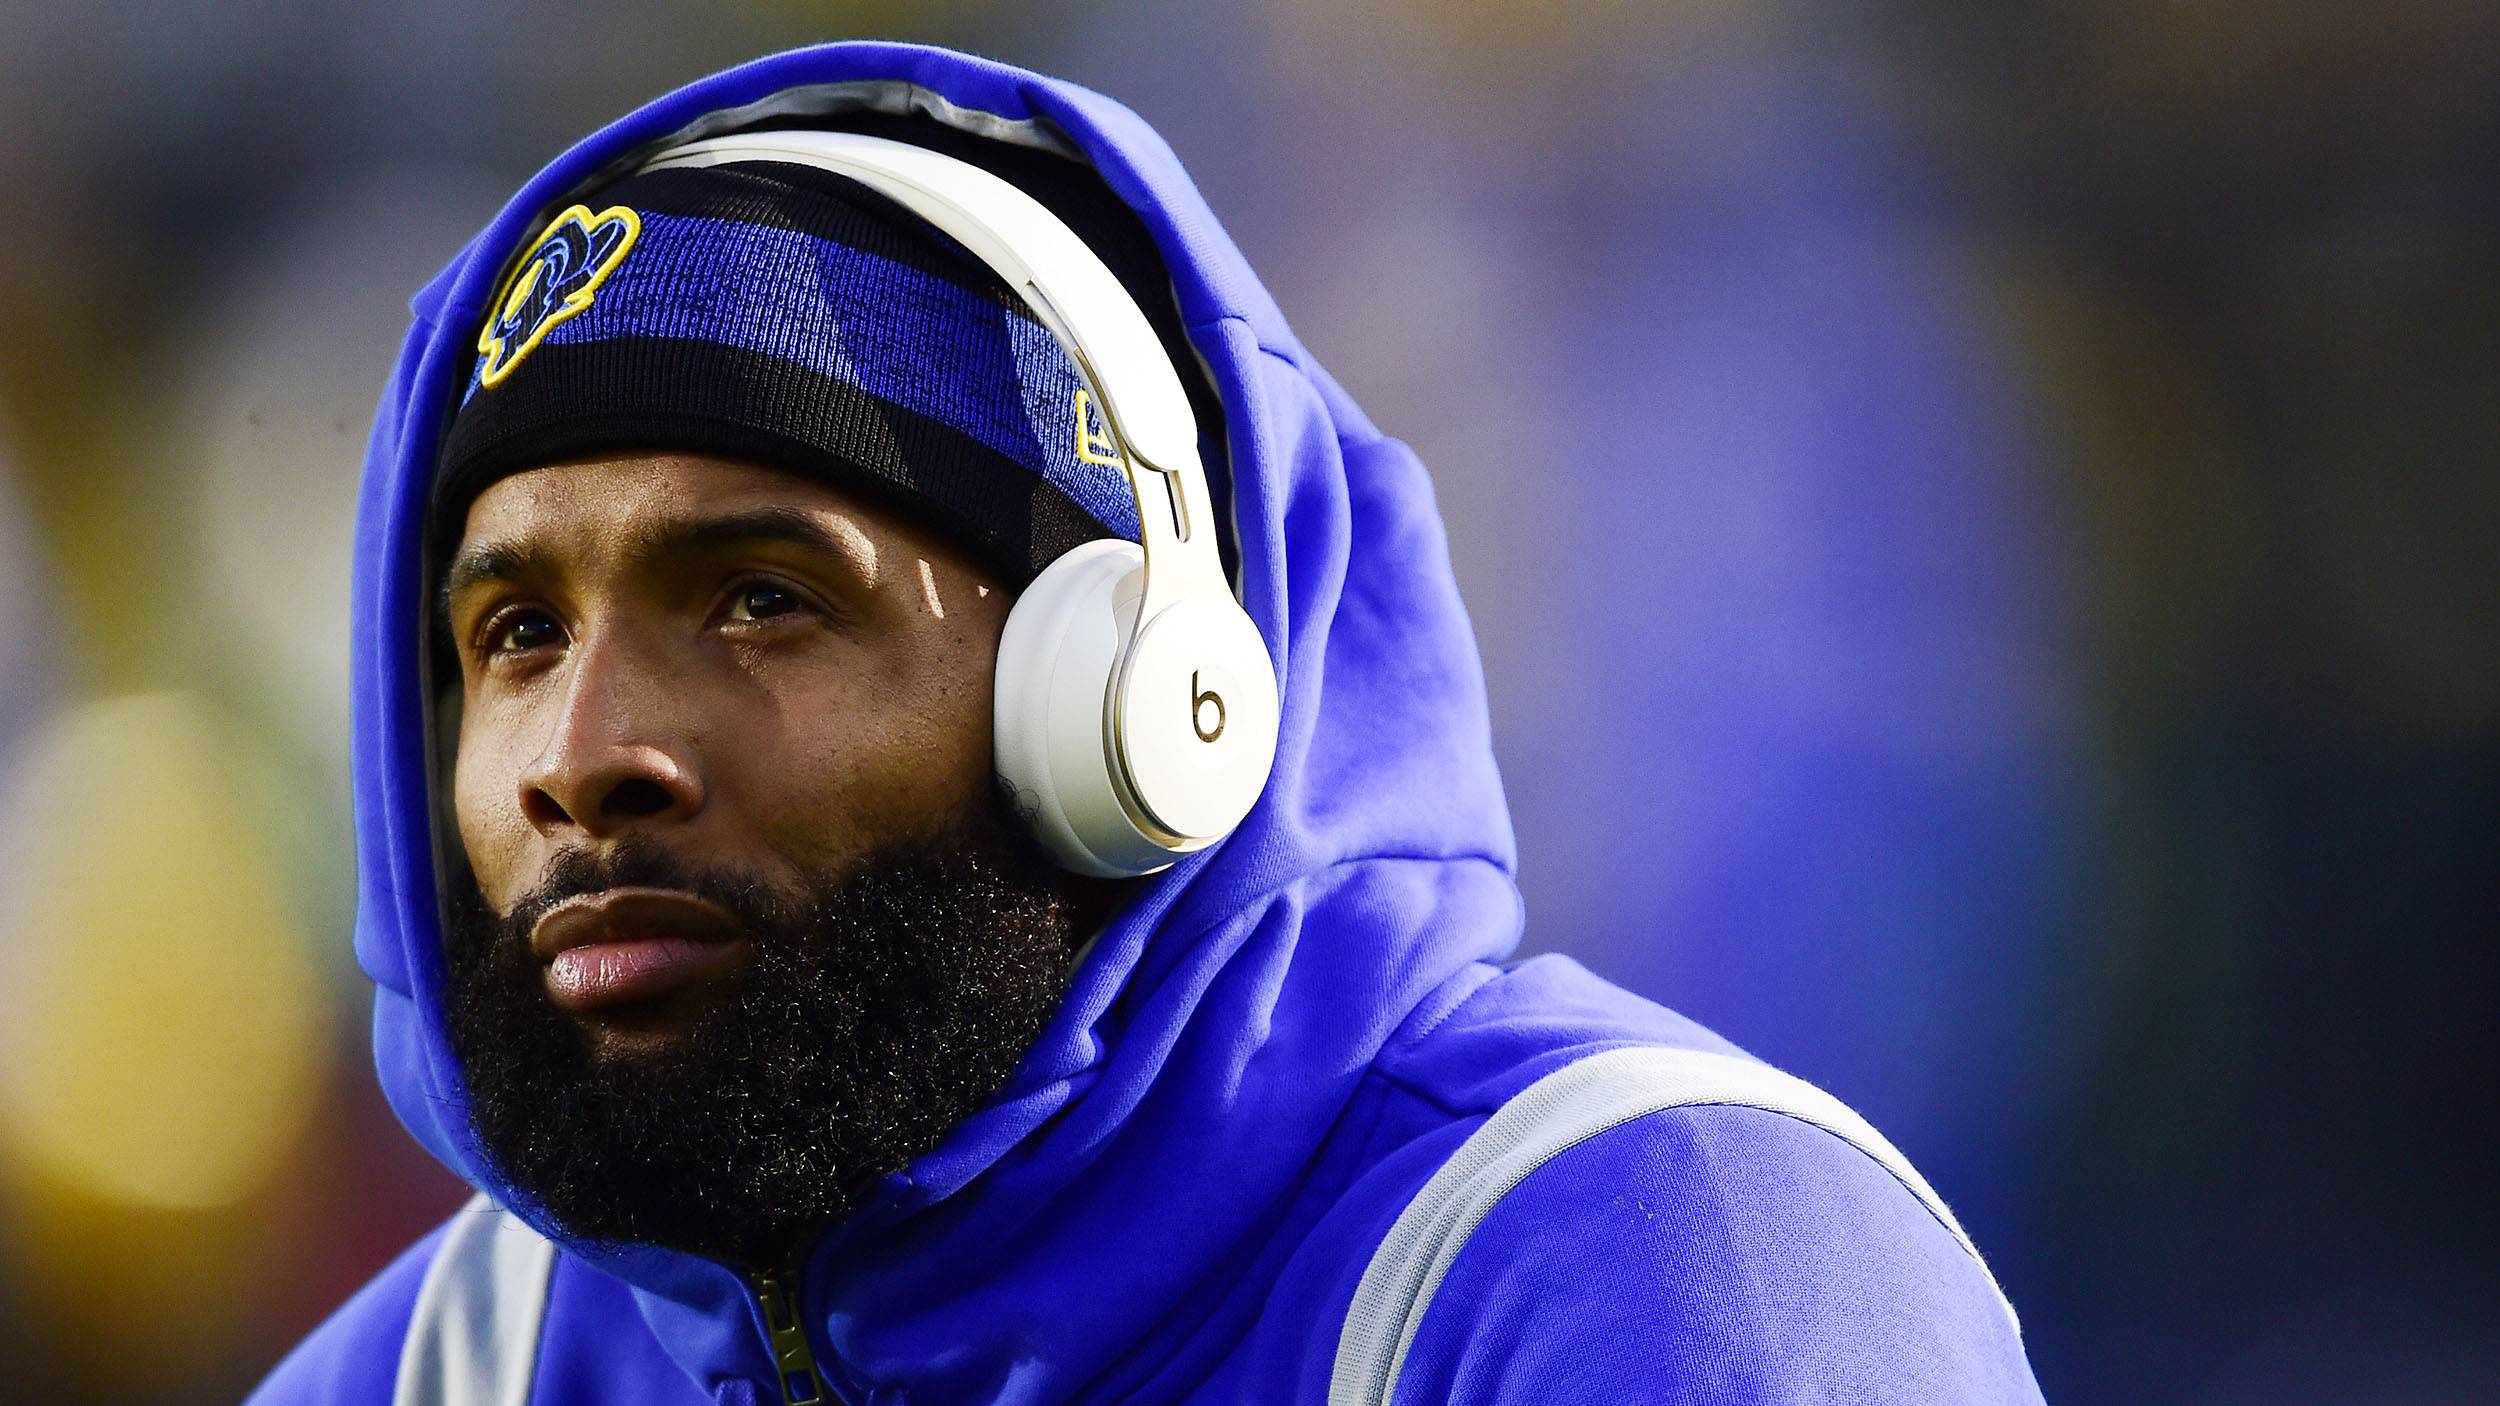 Rams player Odell Beckham Jr. will accept NFL salary in Bitcoin